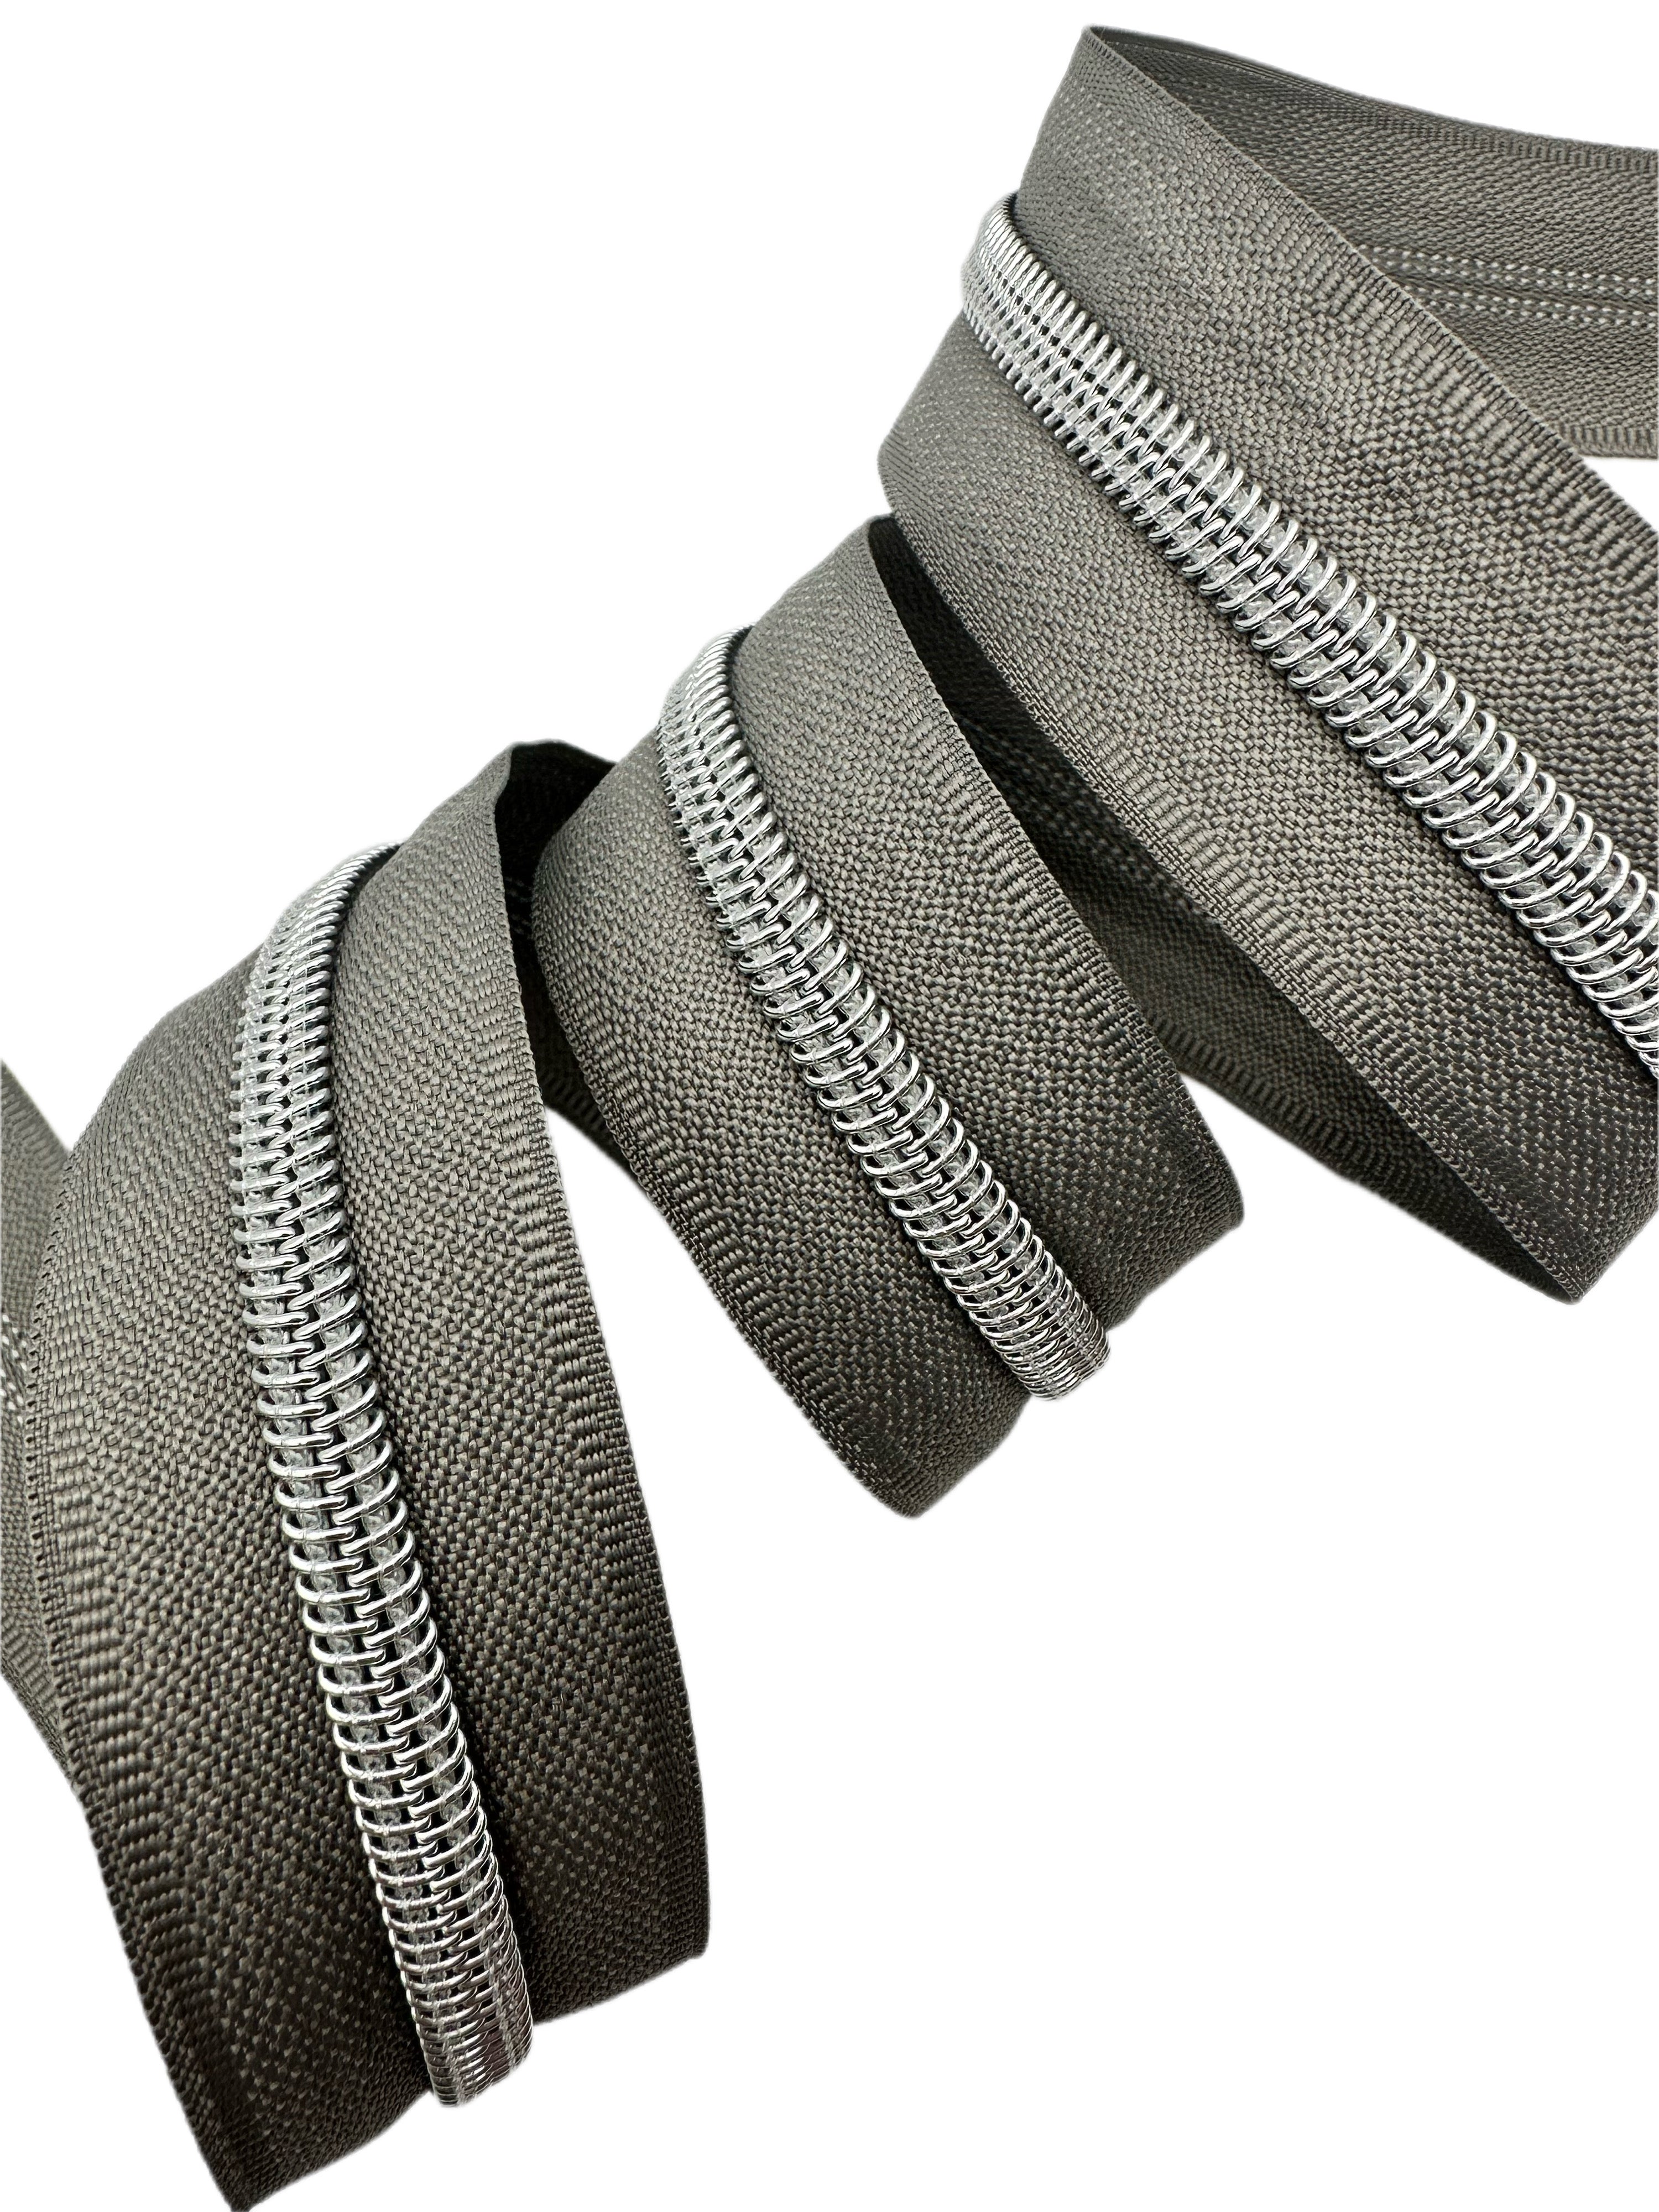 Grey Tape with Silver Zipper Tape